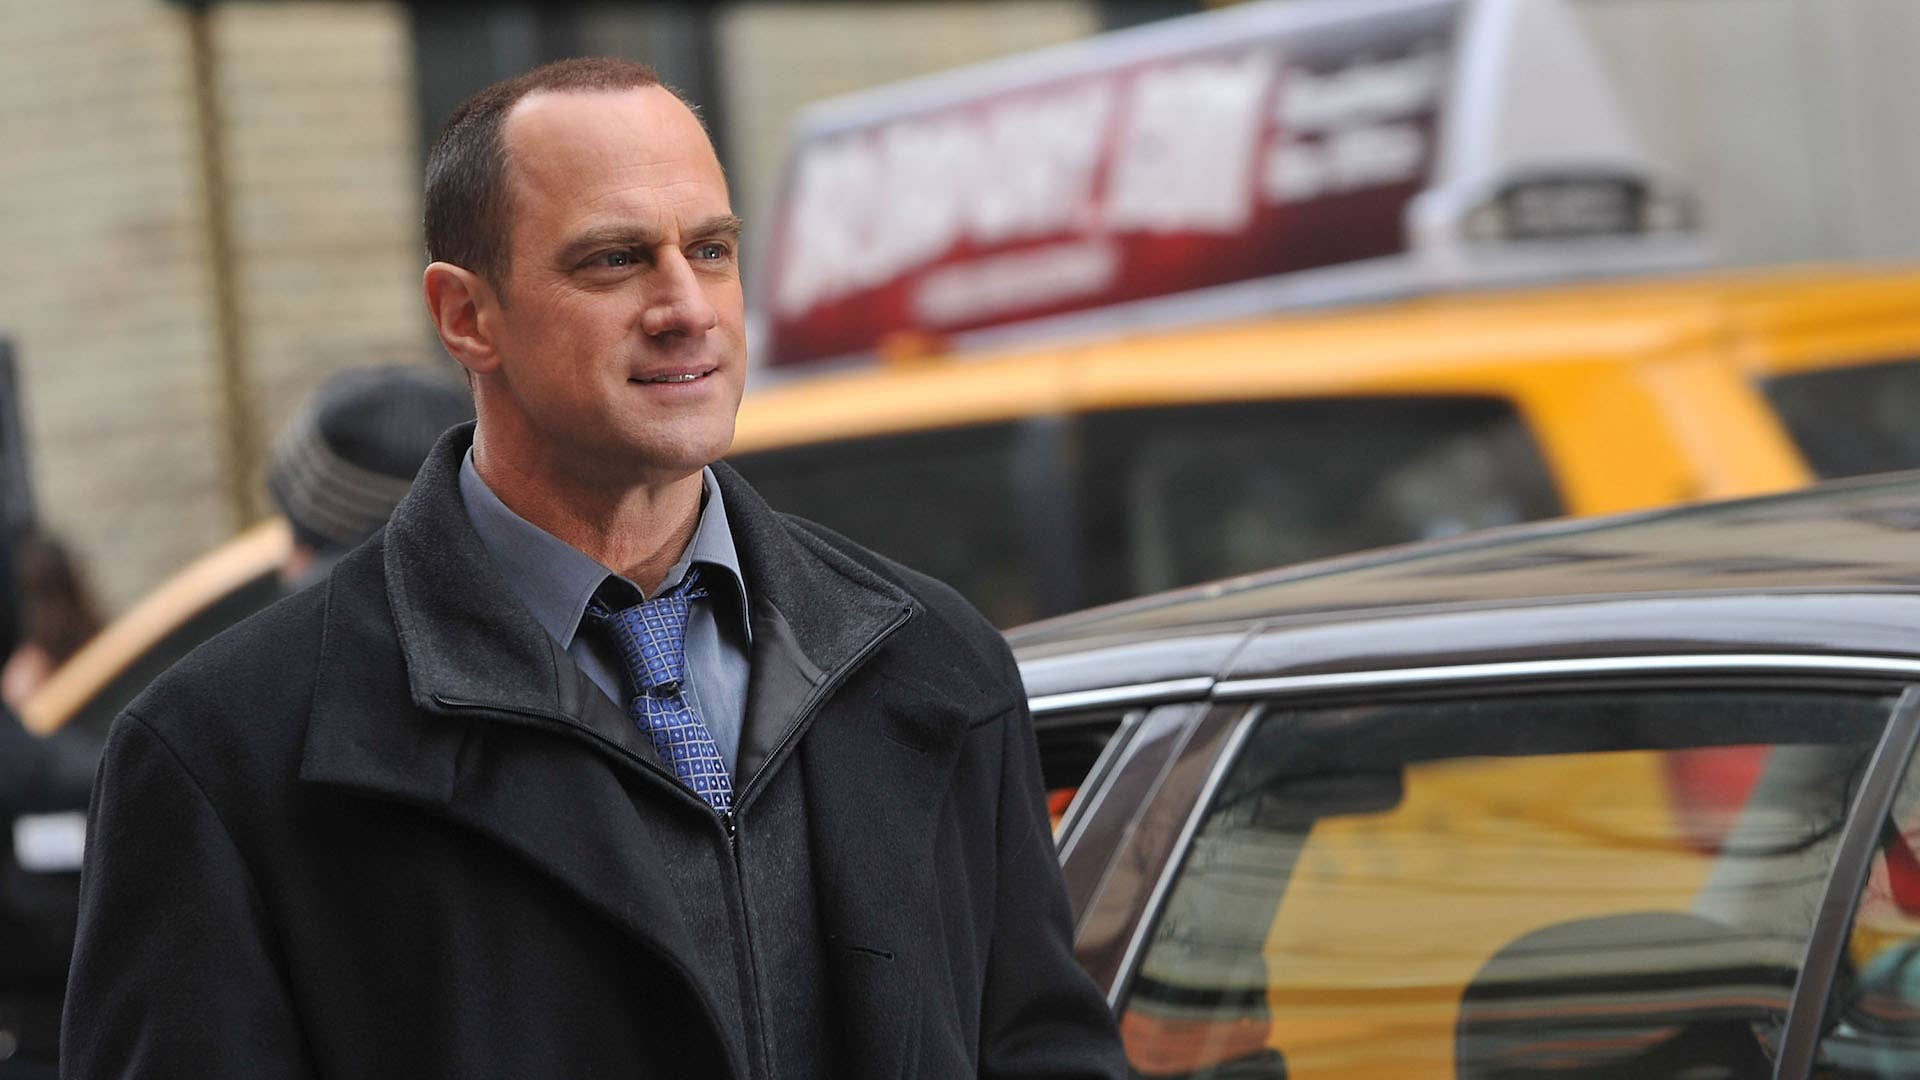 Christopher Meloni on location for "Law & Order: SVU" on the streets of Manhattan.